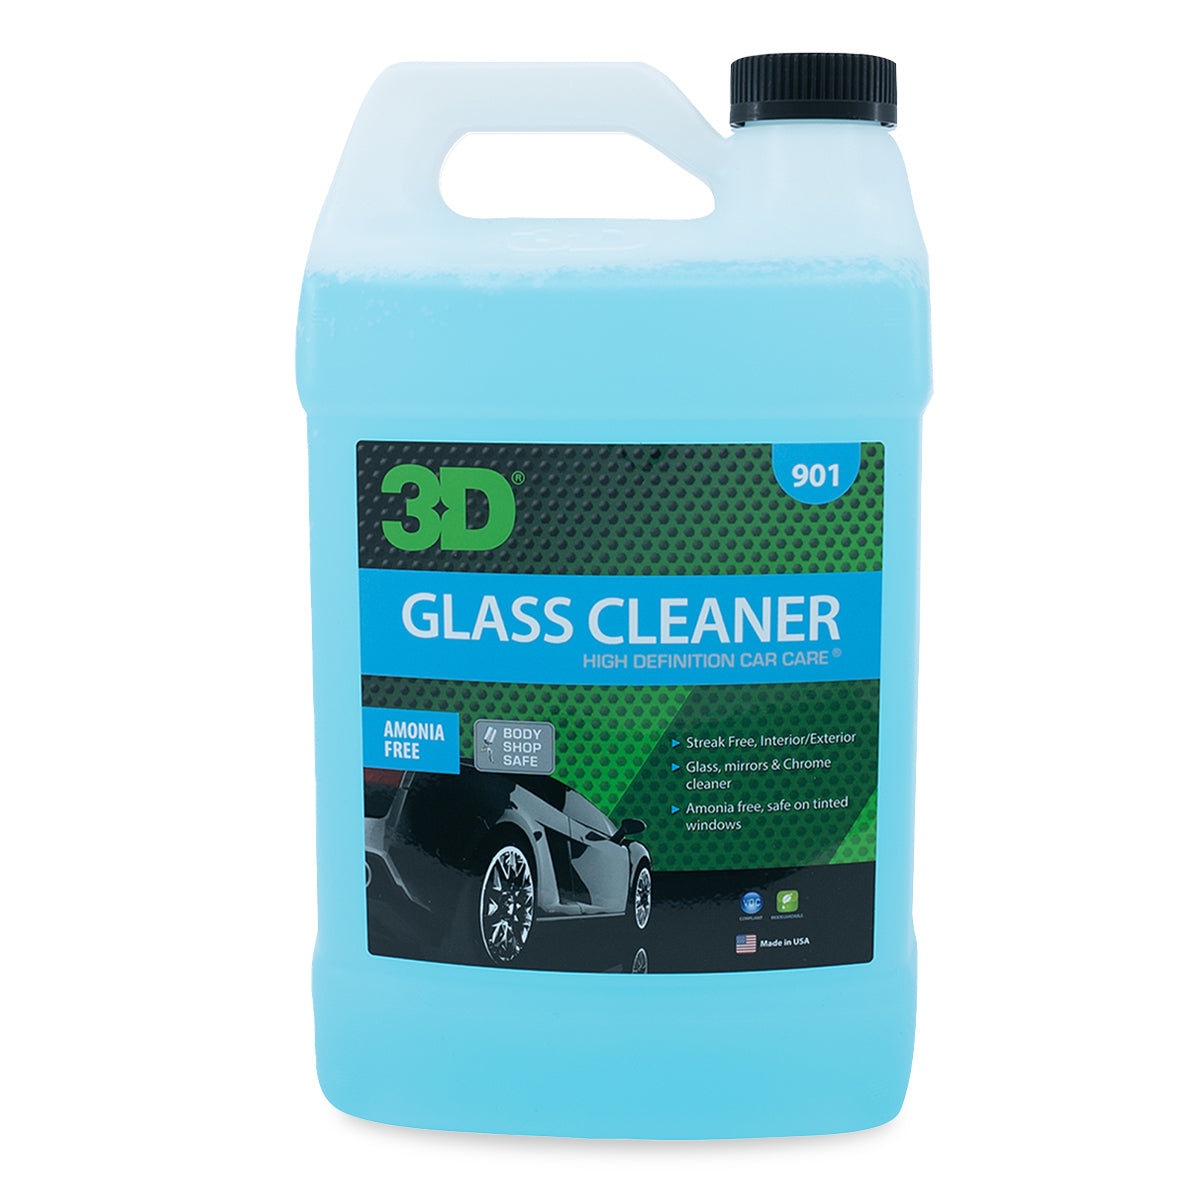 3D Glass Cleaner 16 oz.